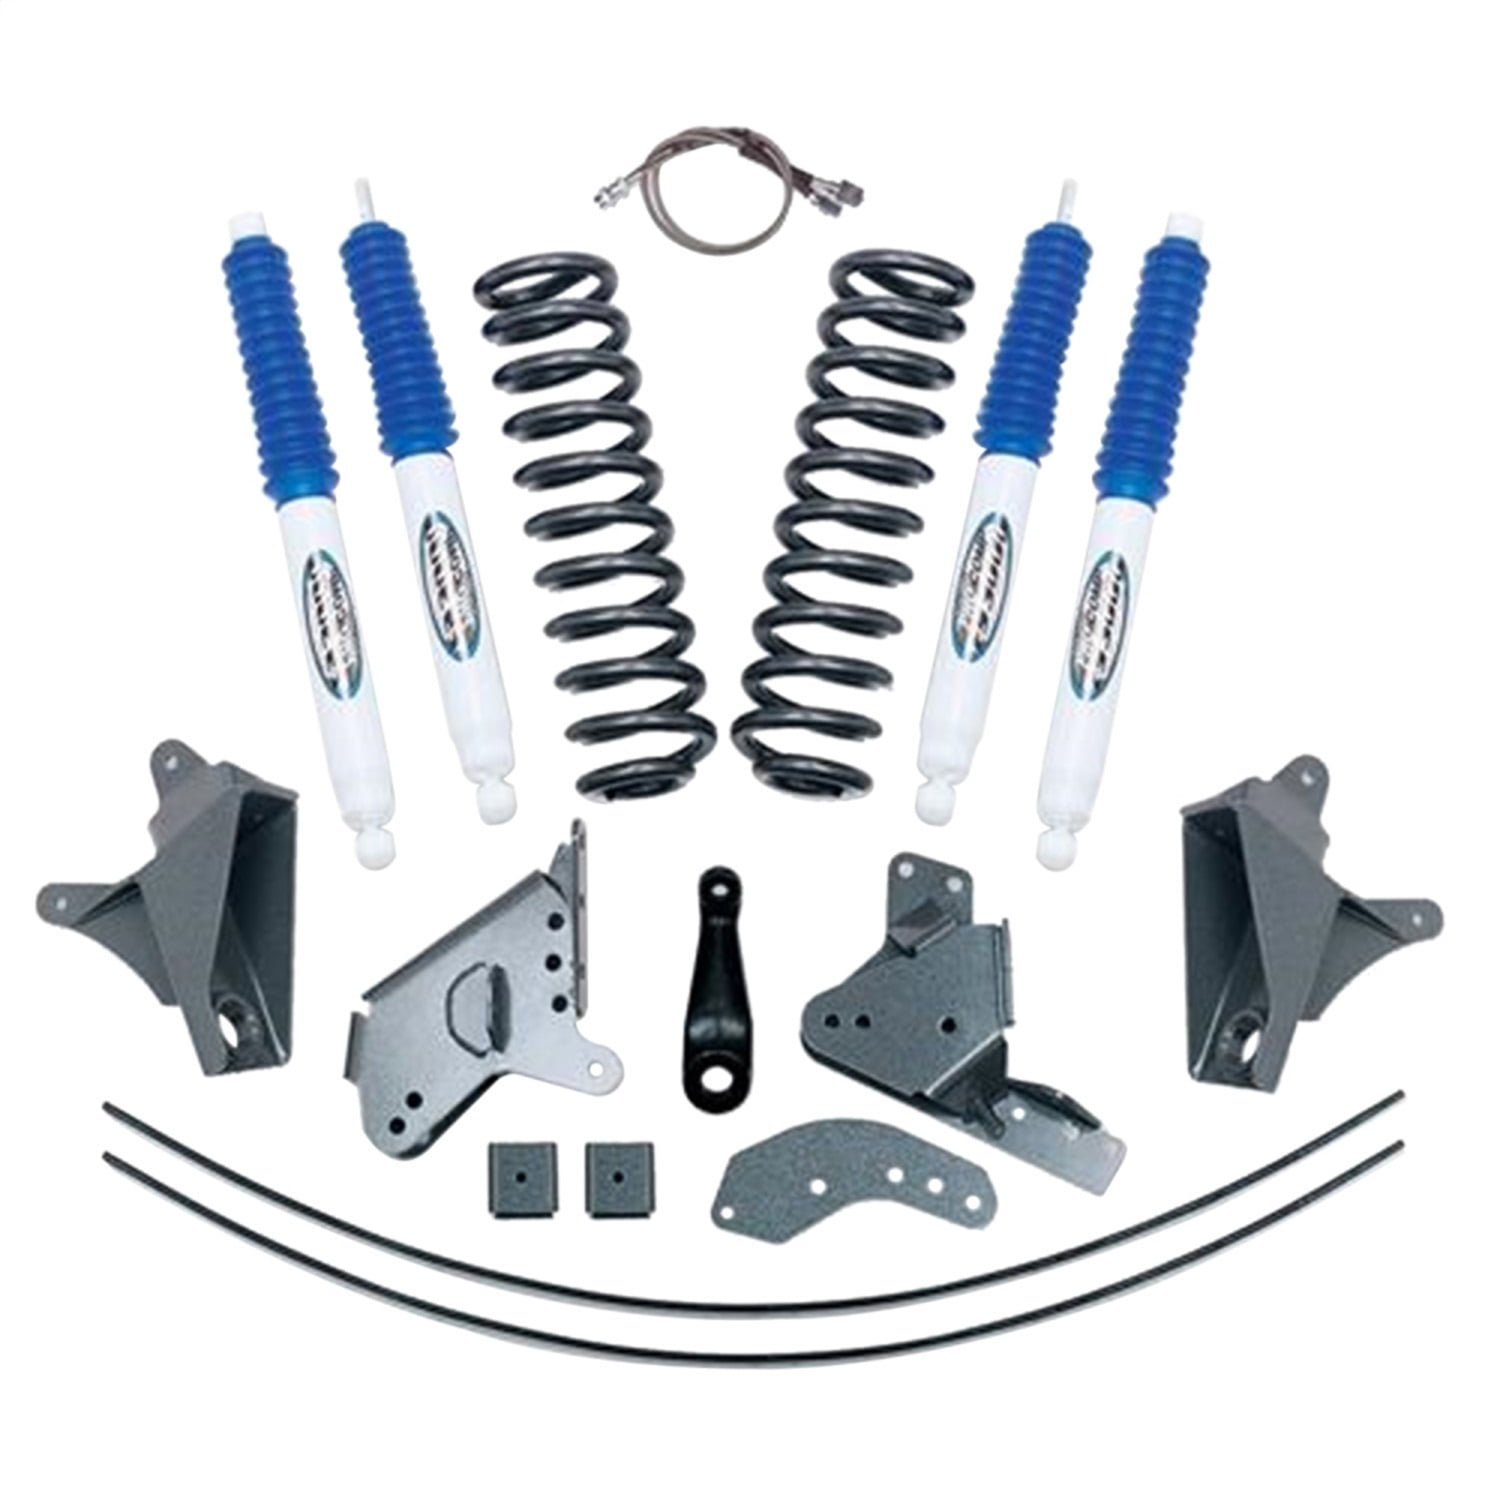 Add-A-Leaf and ES3000 Shocks for Ford Bronco '90-'96 Pro Comp K4061B 6 Stage I Lift Kit with Coil Springs 